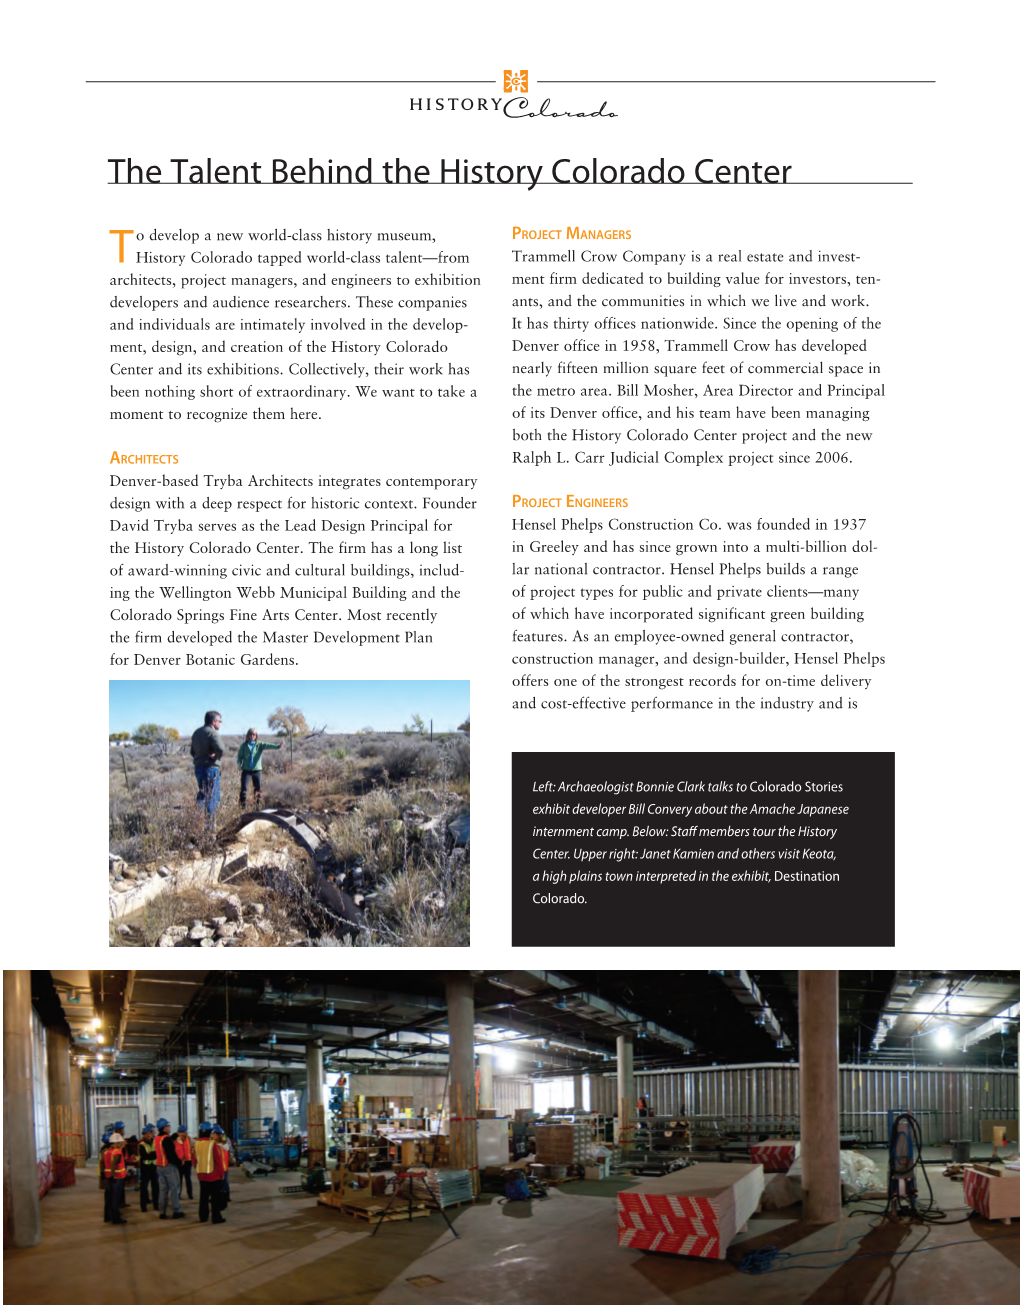 The Talent Behind the History Colorado Center